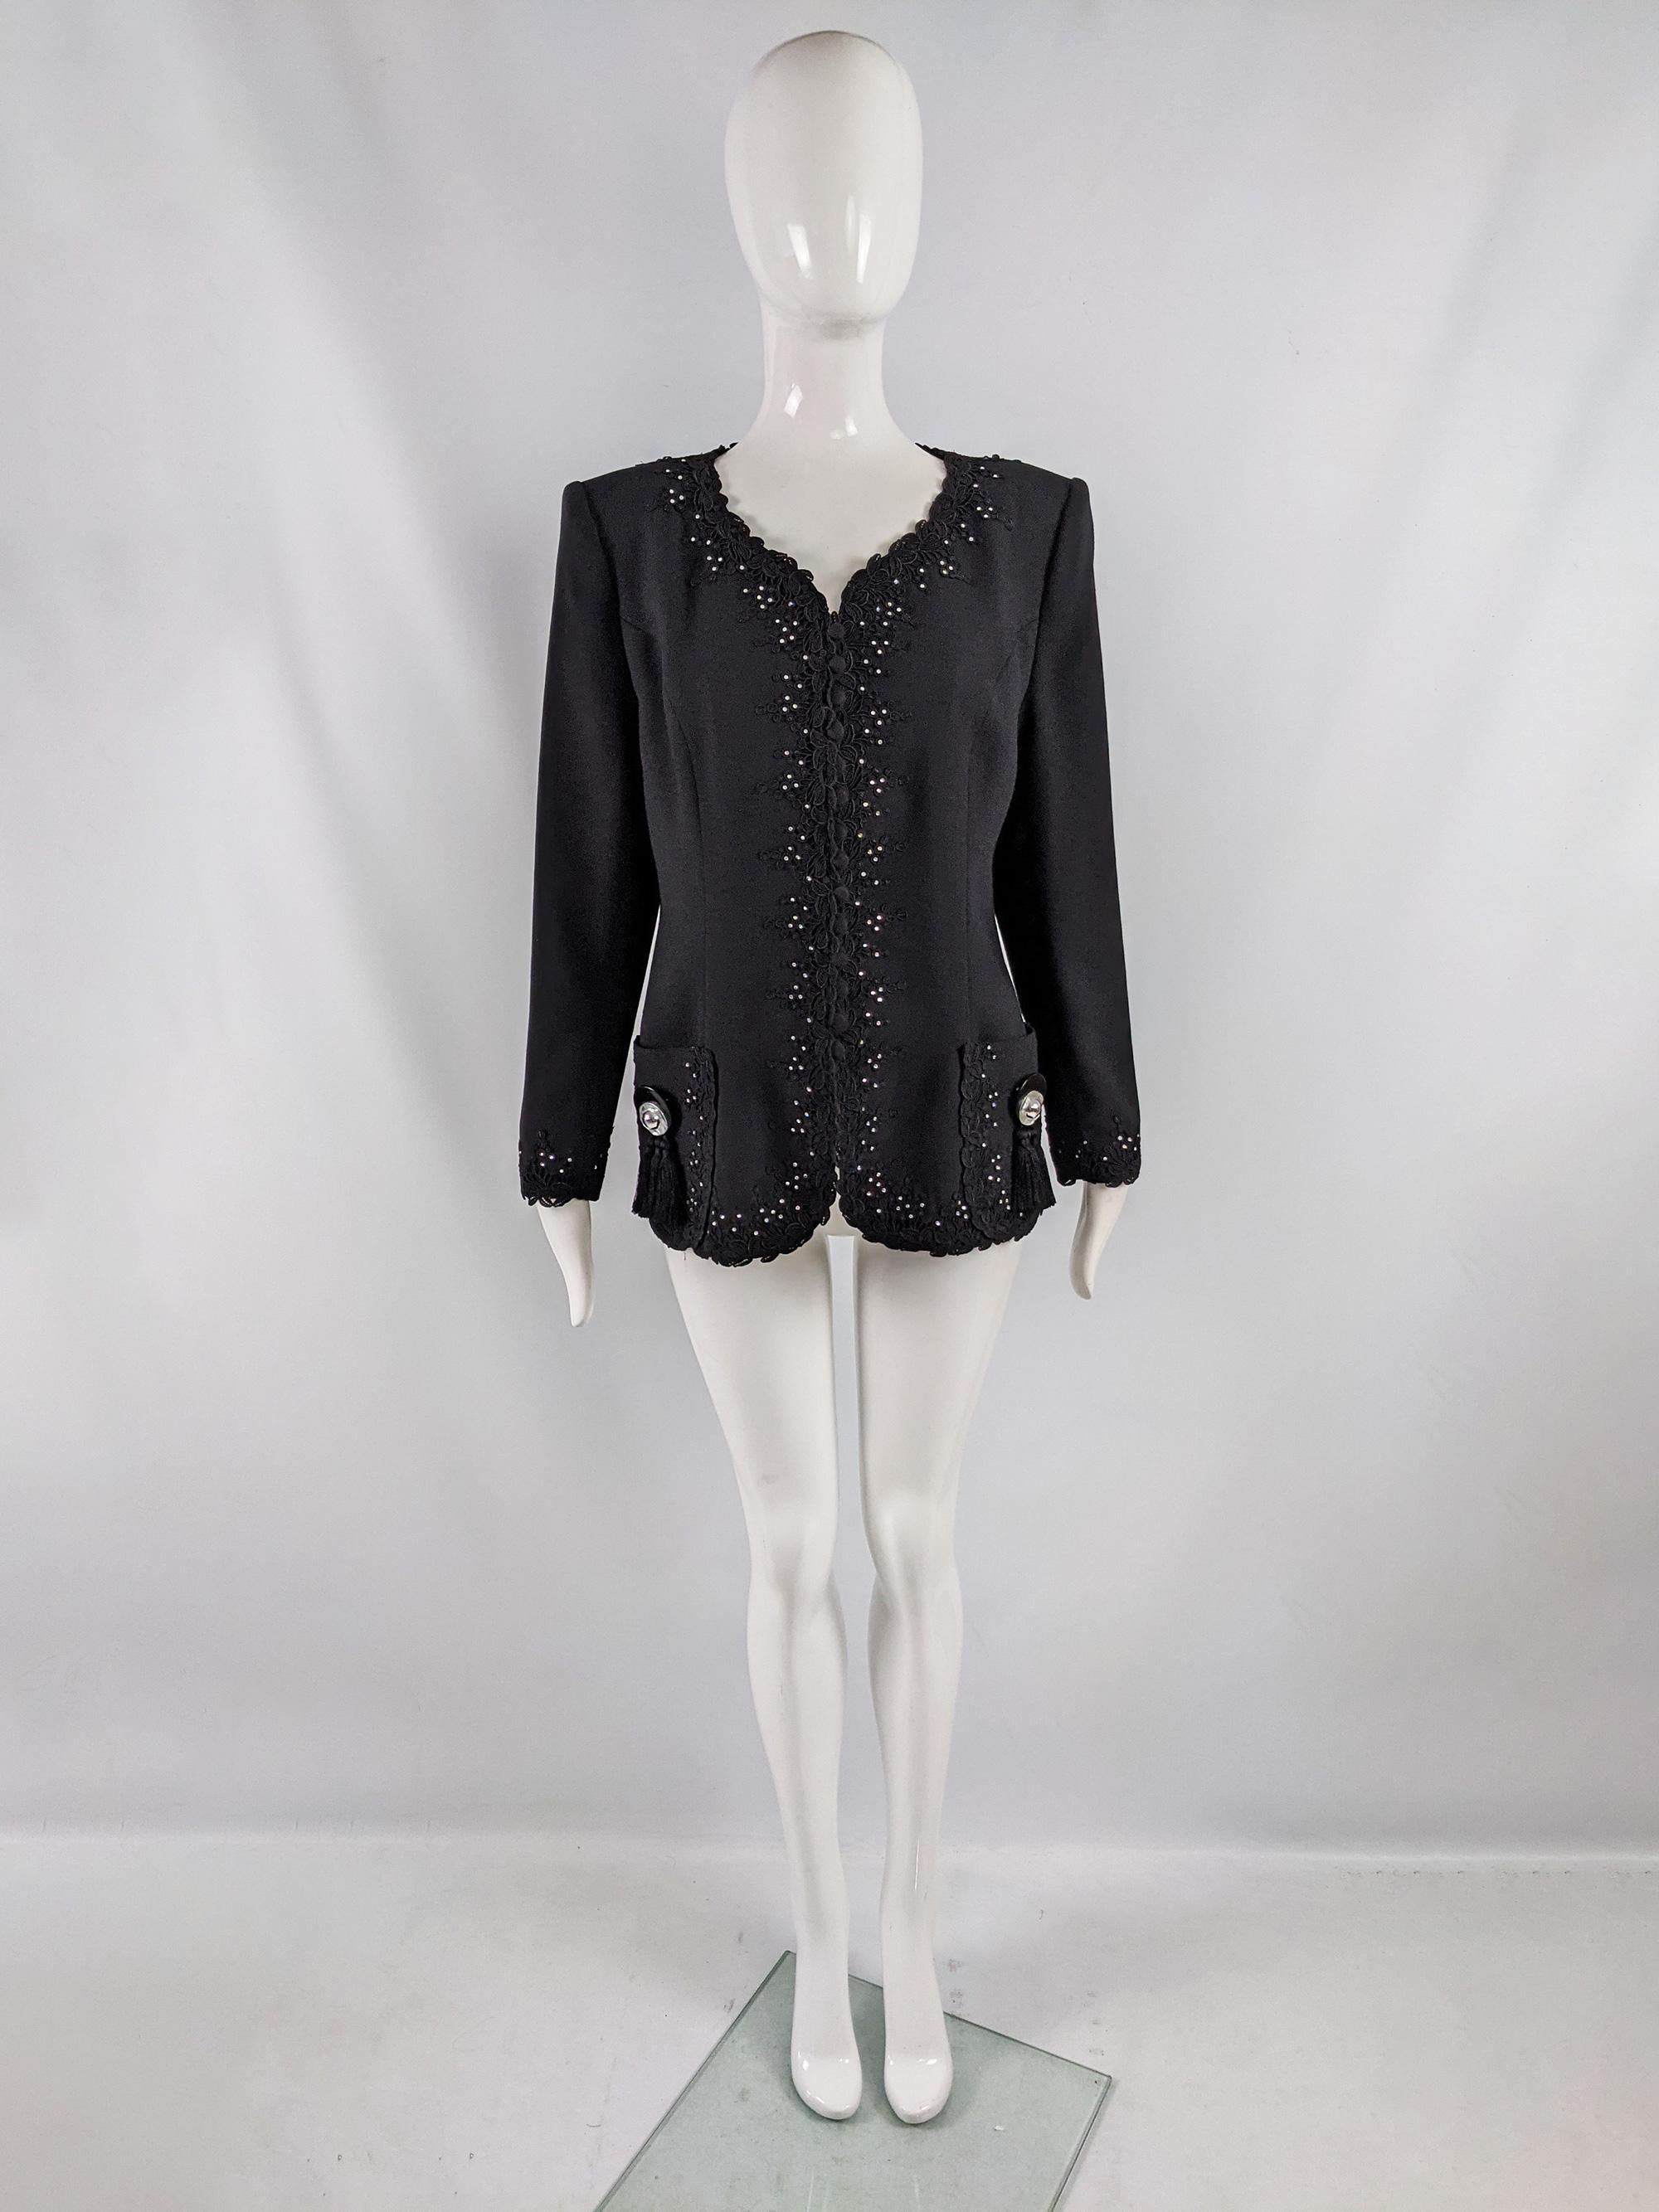 A classy vintage womens jacket from the 80s by luxury British fashion designer, Helen Anderson. In a black wool blend crepe with shoulder pads, a beaded lace trim around the collar and an incredible tassel design on the pockets.

Size: Marked